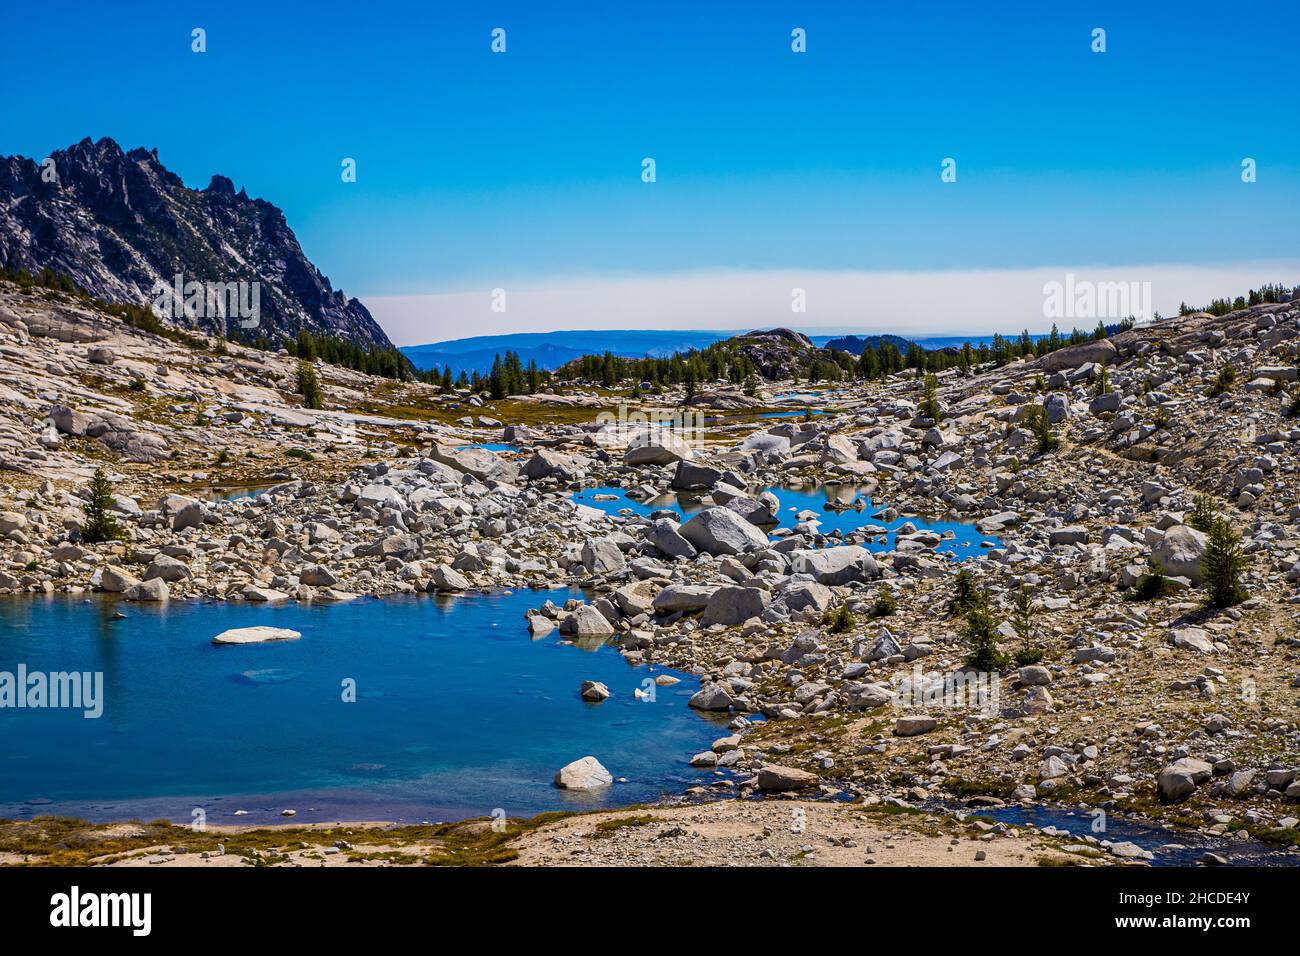 Looking out over rocky stone ponds reflecting the sky in The Enchantments of Alpine Lakes Wilderness in the Cascades, Washington, USA Stock Photo